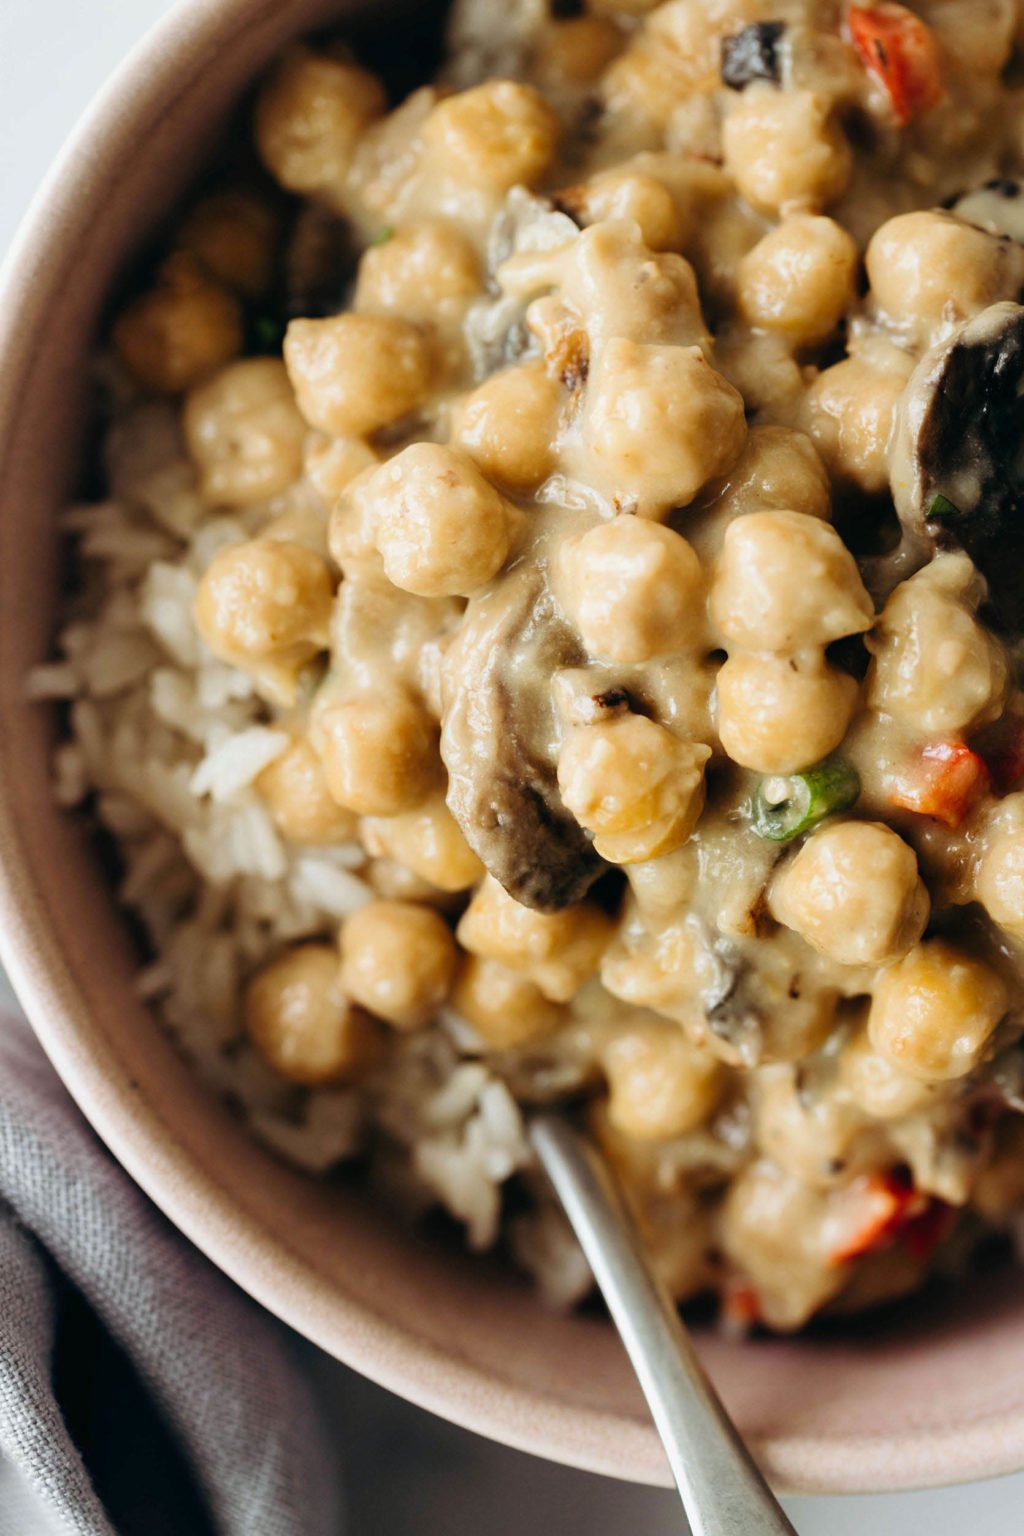 A dish of chickpeas à la King has been served over a bed of brown rice.